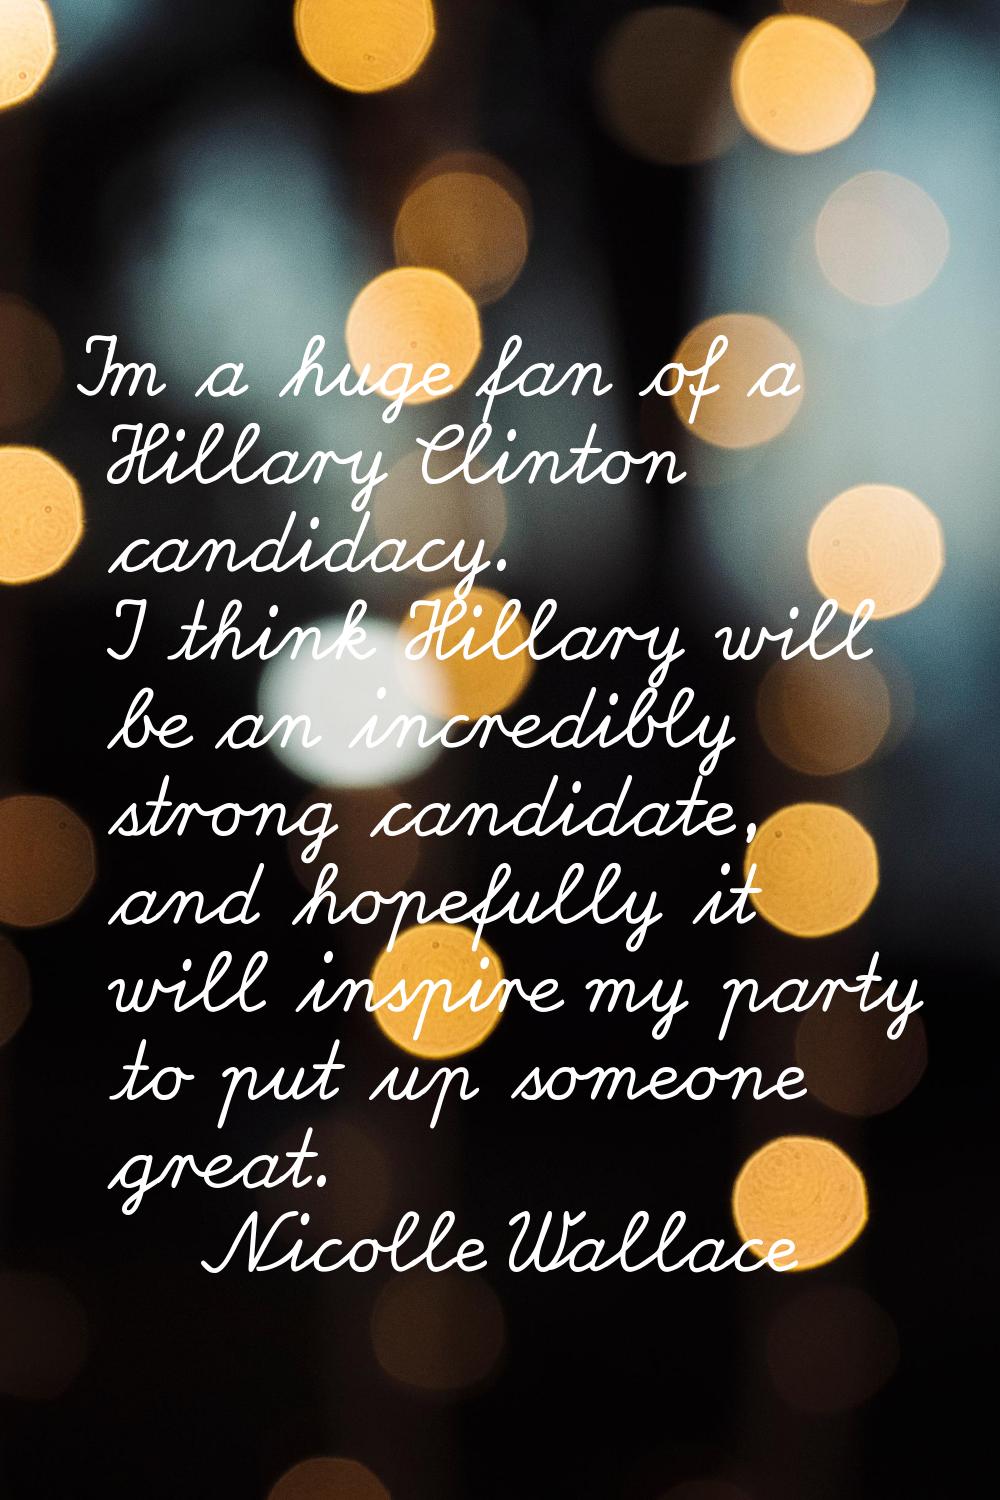 I'm a huge fan of a Hillary Clinton candidacy. I think Hillary will be an incredibly strong candida